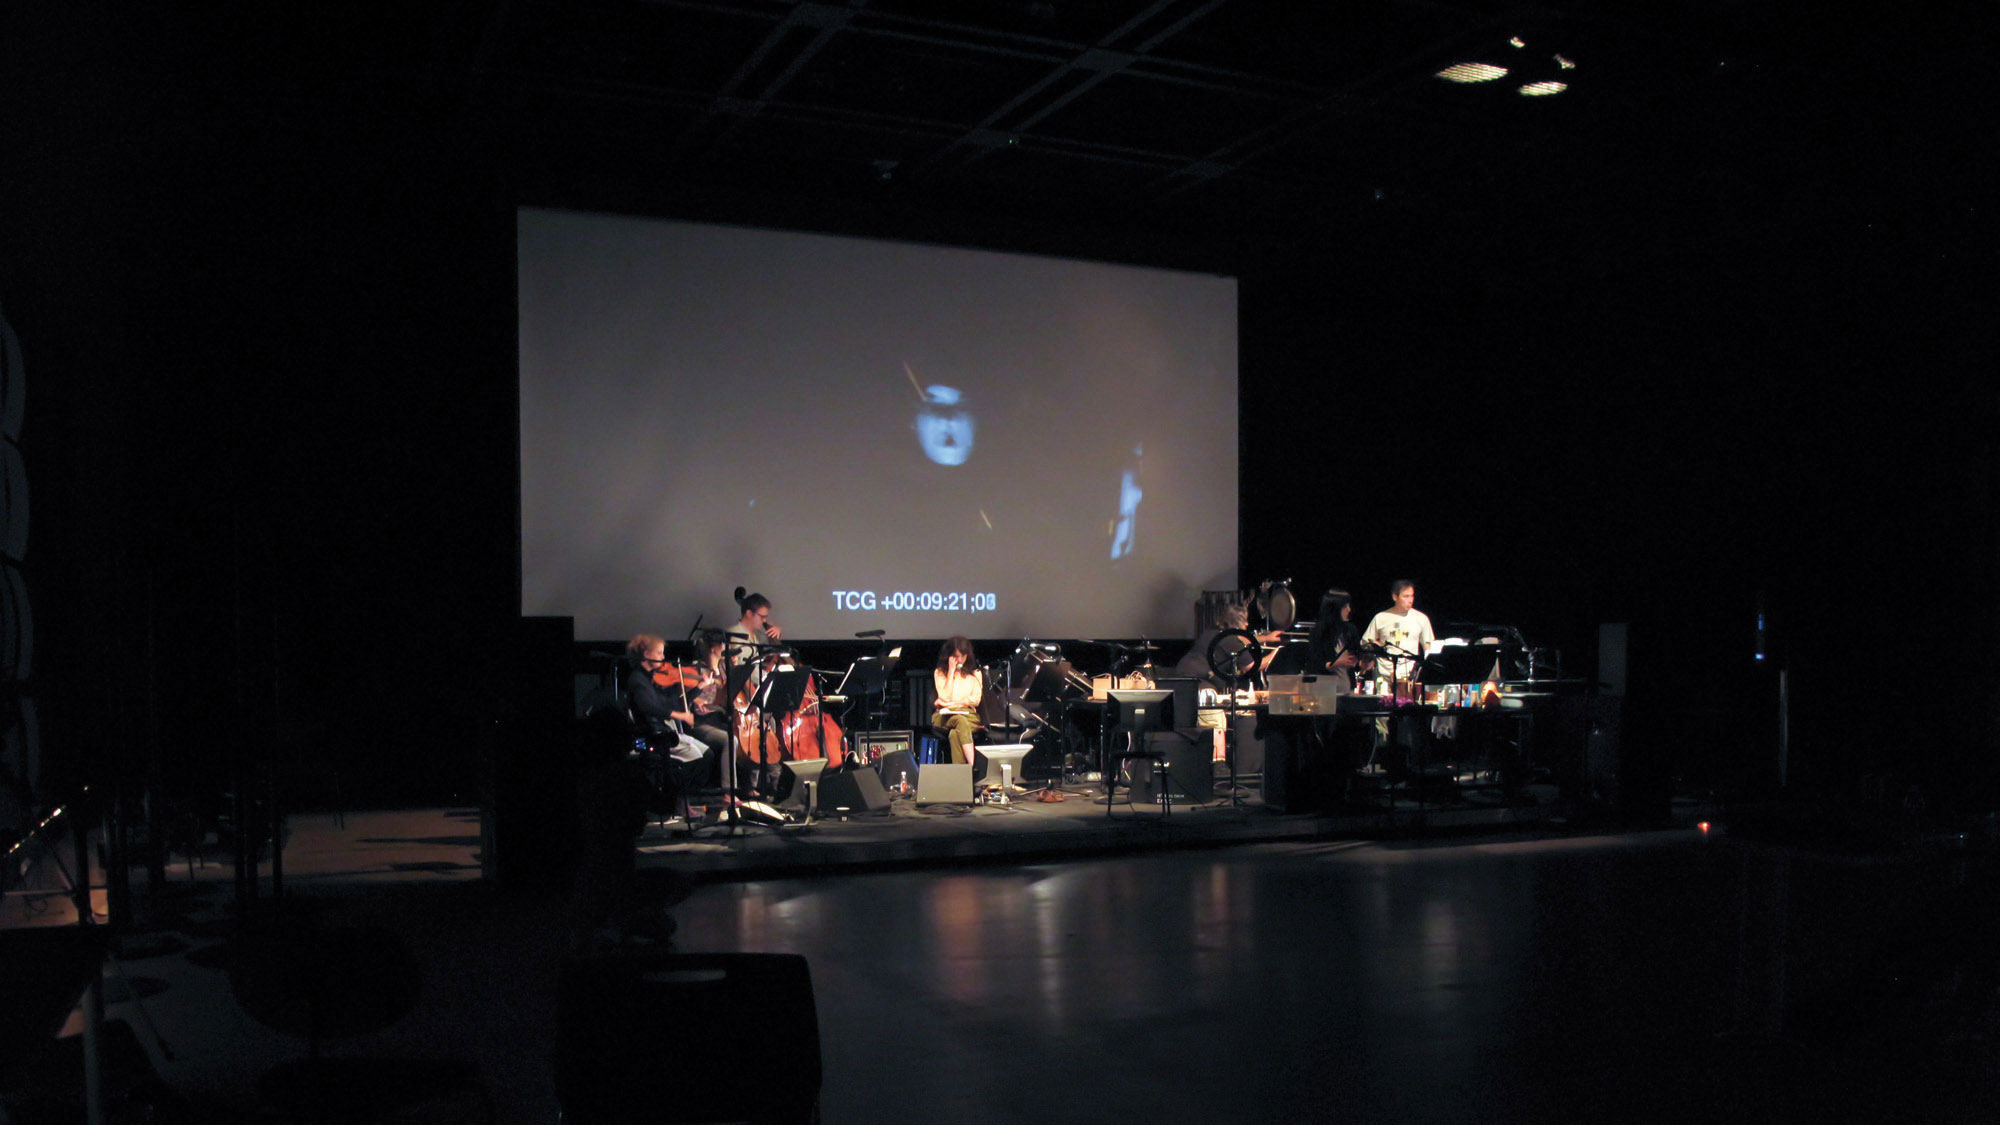 A small pit orchestra set up on a black stage un a large screen projecting "TCG +00:09:21;08" in white block letters.  